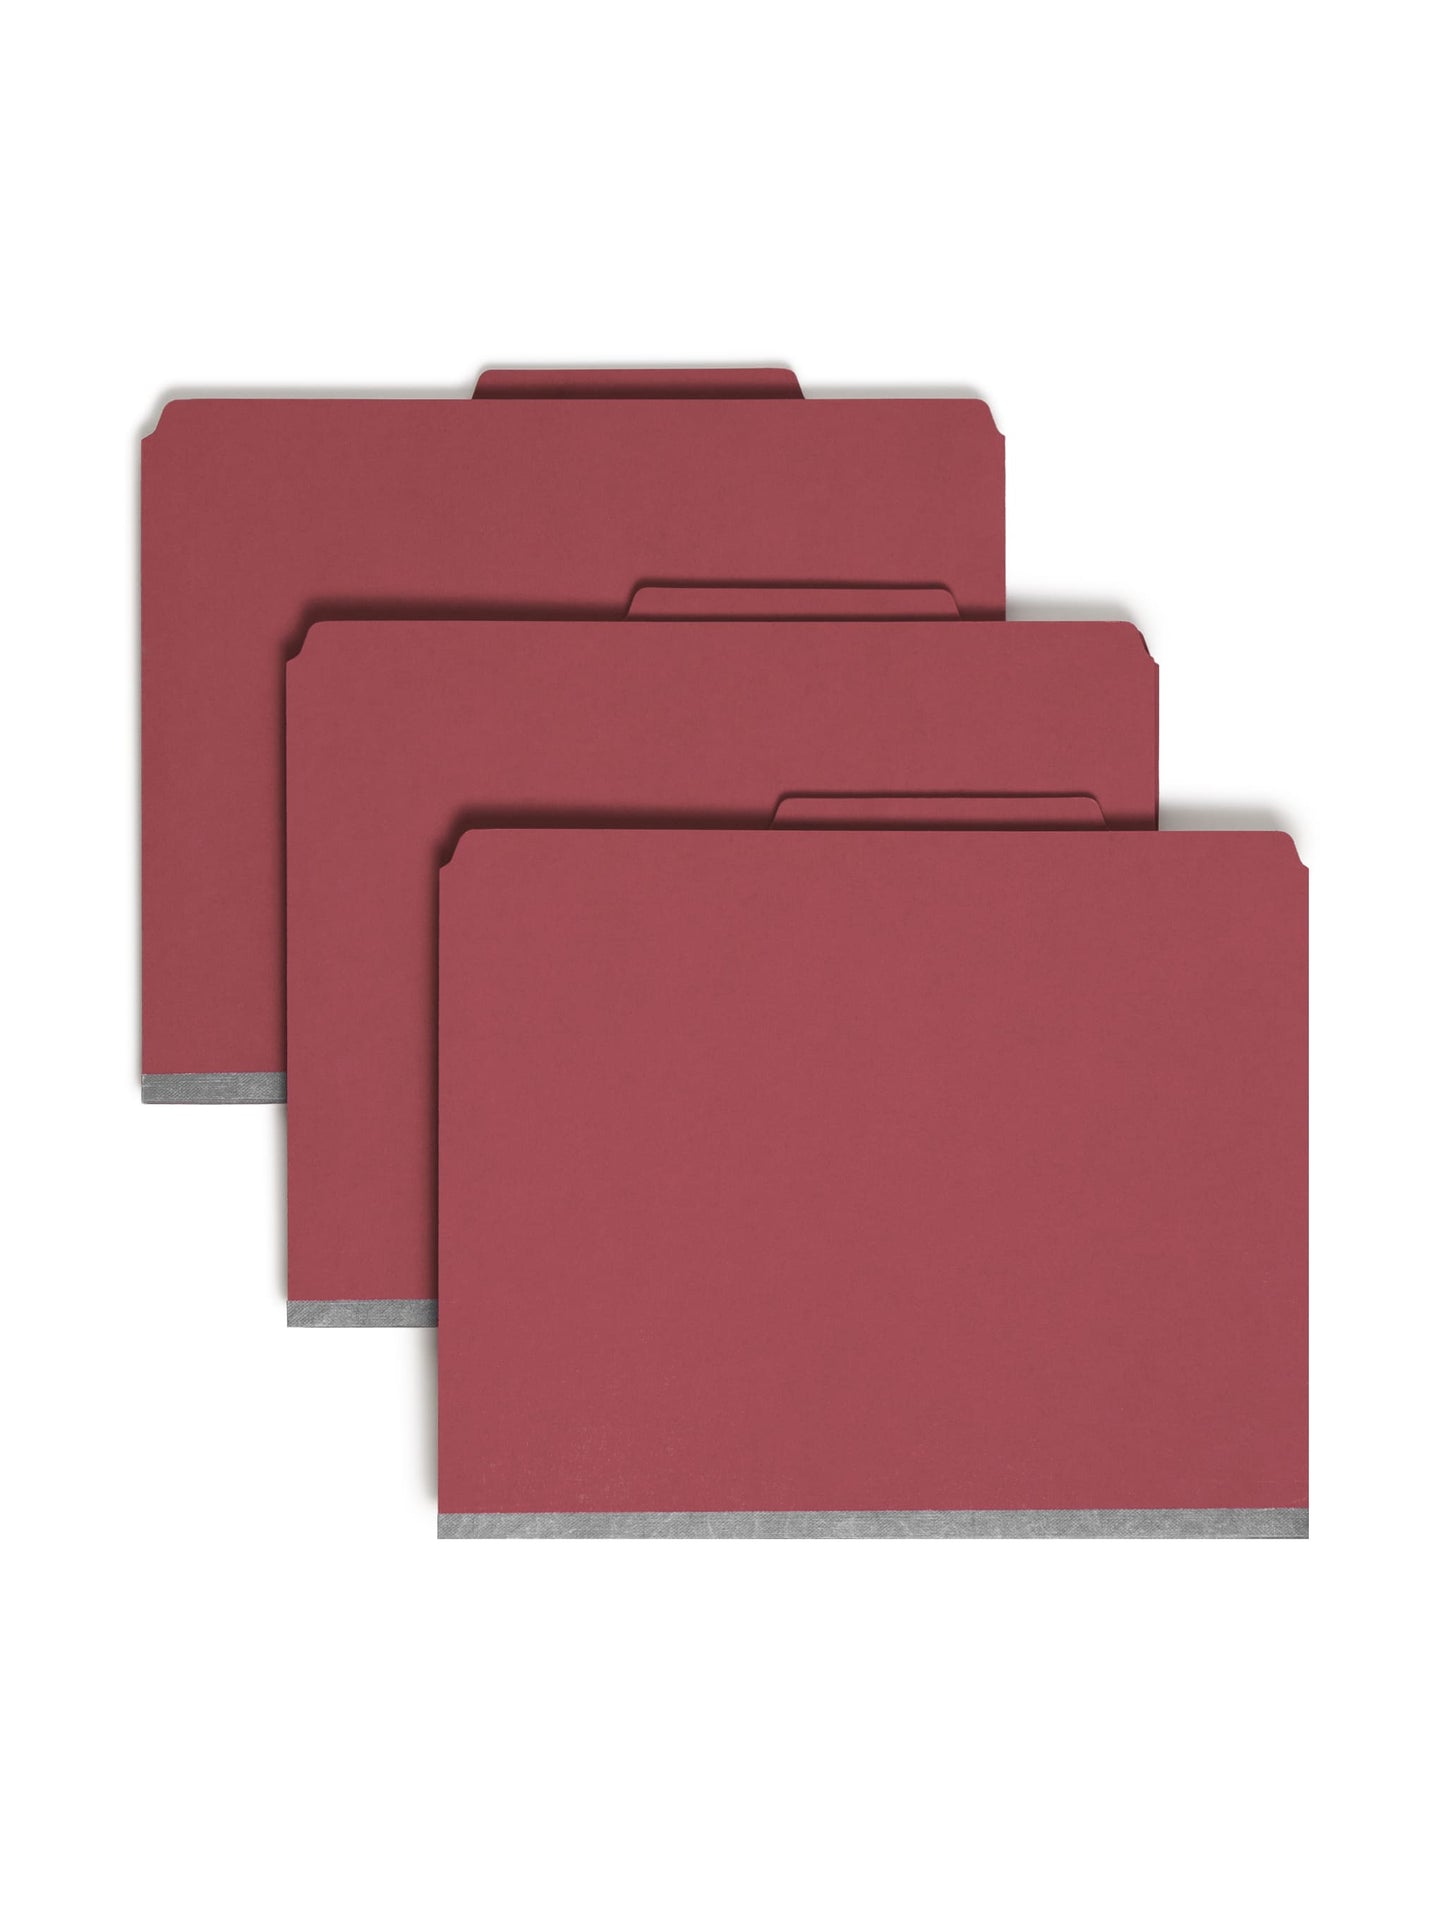 SafeSHIELD® Pressboard Classification File Folders with Pocket Dividers, Bright Red Color, Letter Size, 